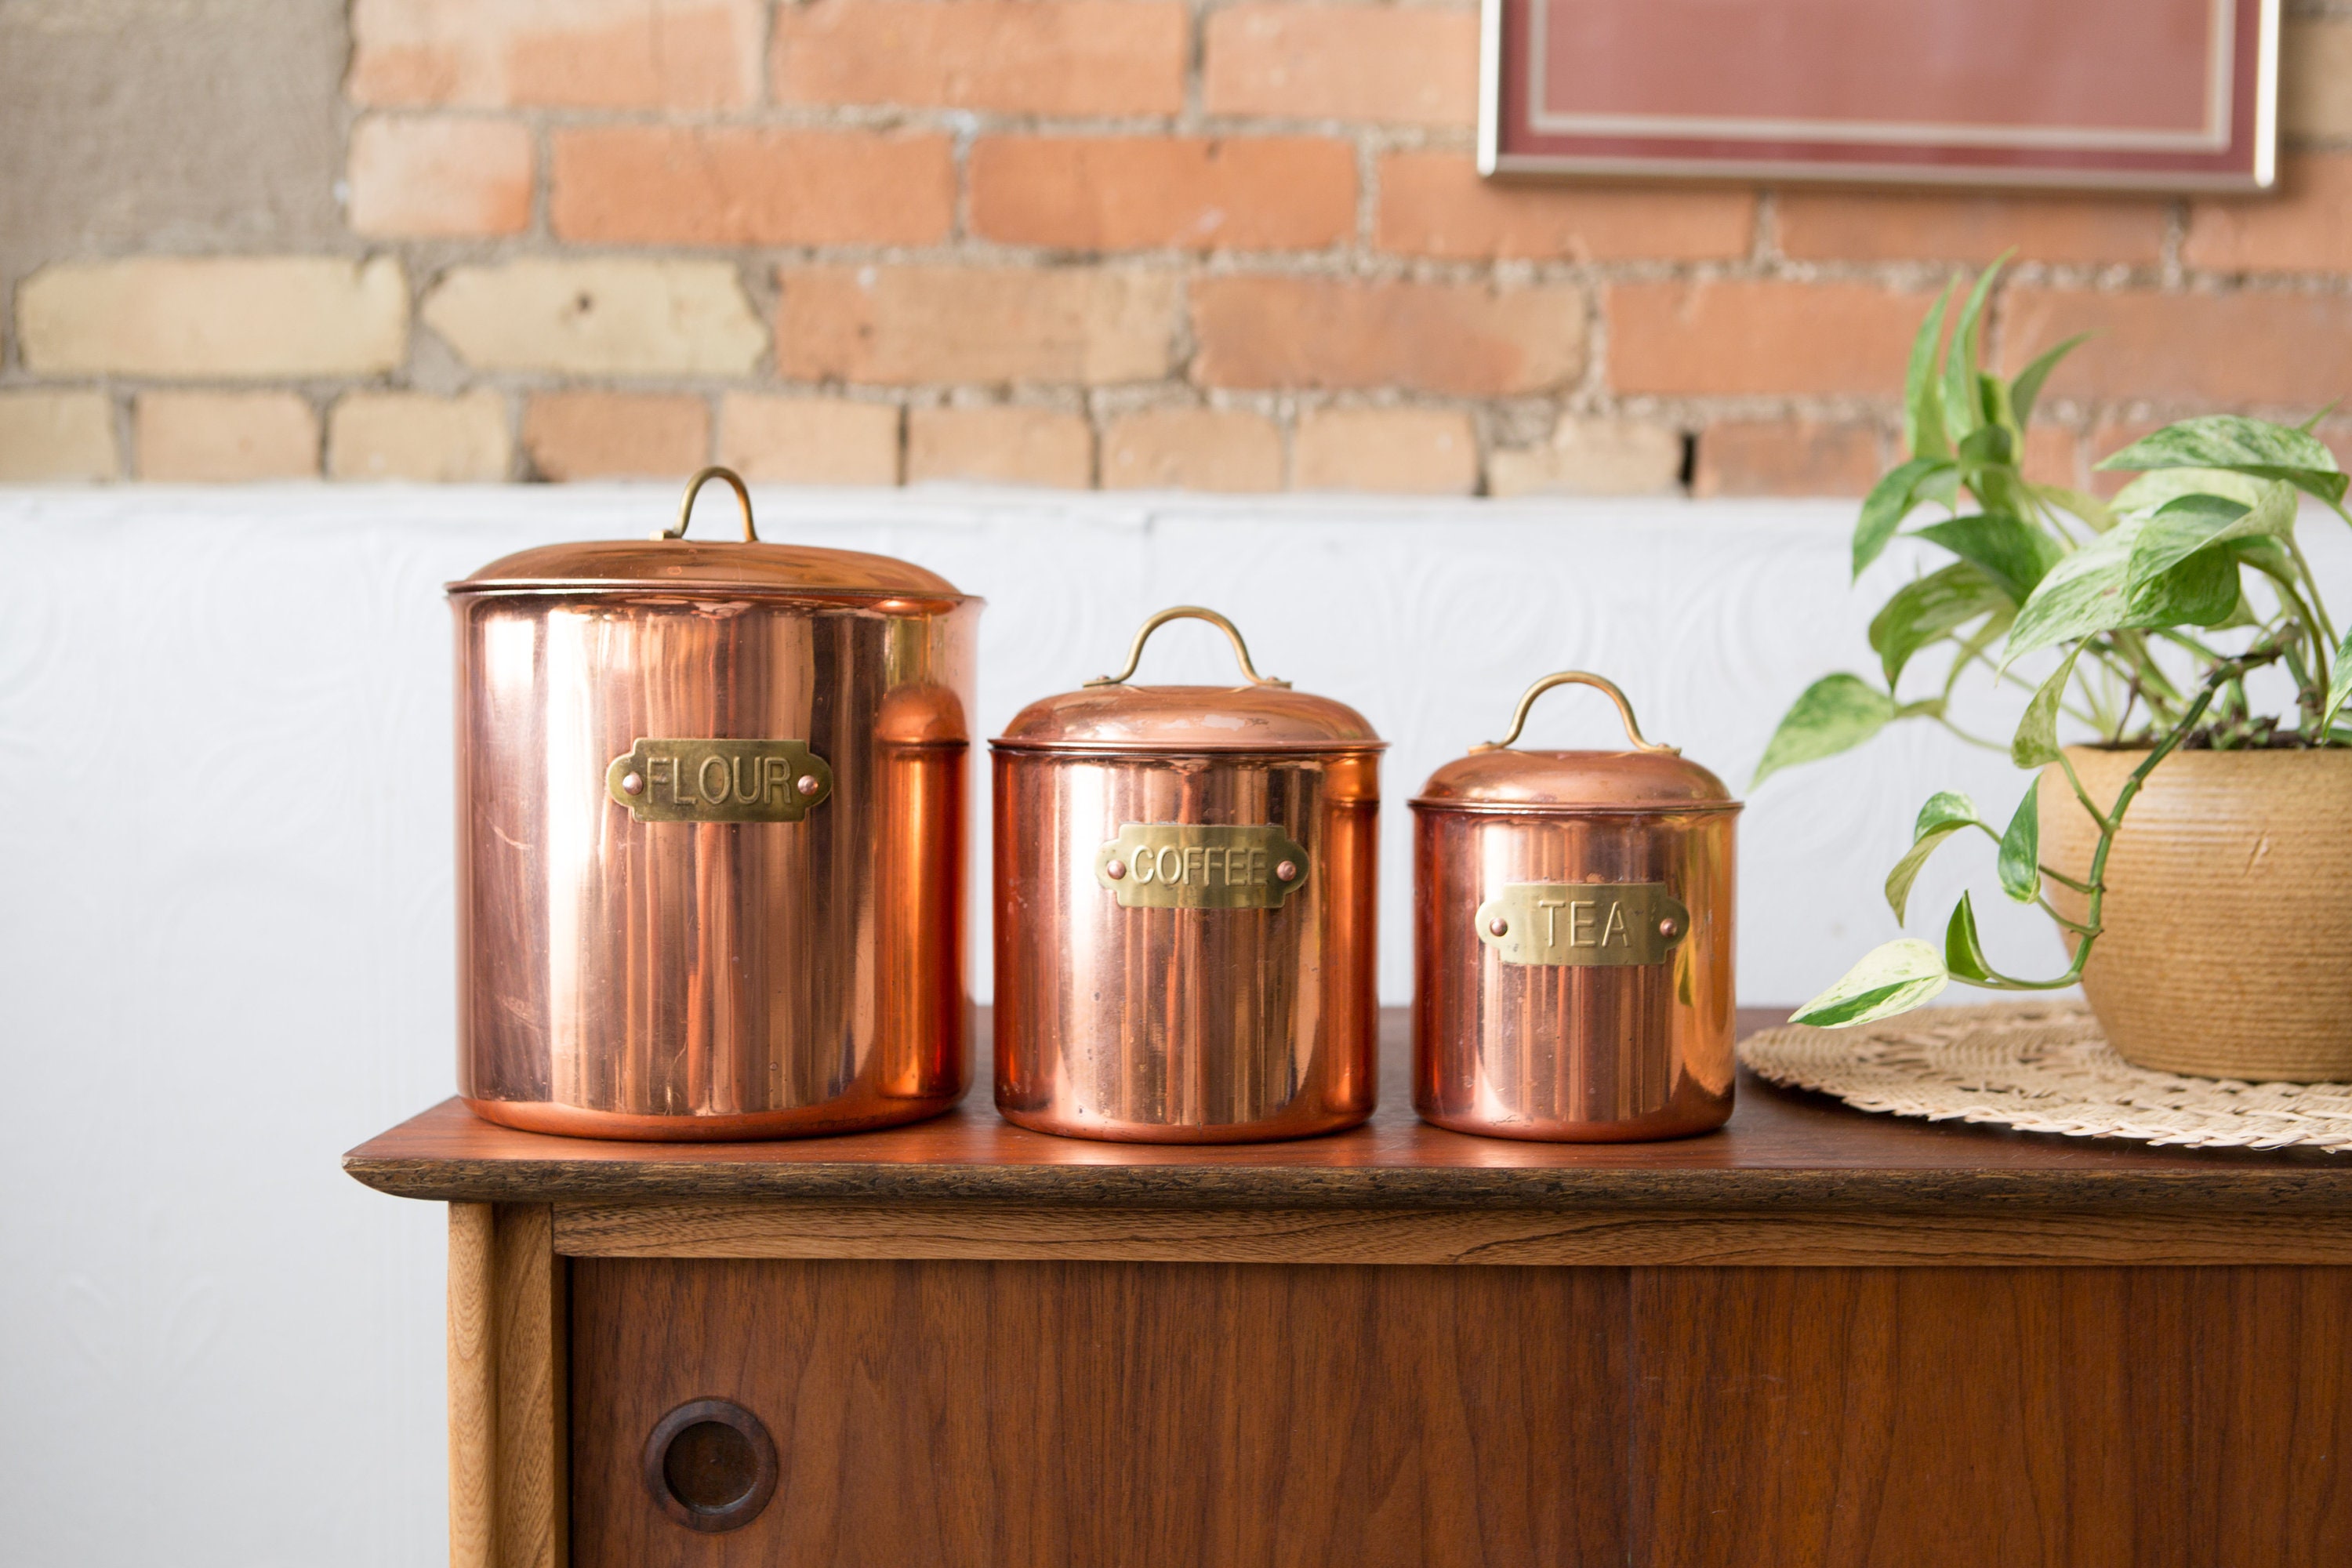 Copper Kitchen Canisters - Vintage Canister Set -Coffee, Tea, Flour Jars -  Diner Style Kitchen Jar Storage Containers